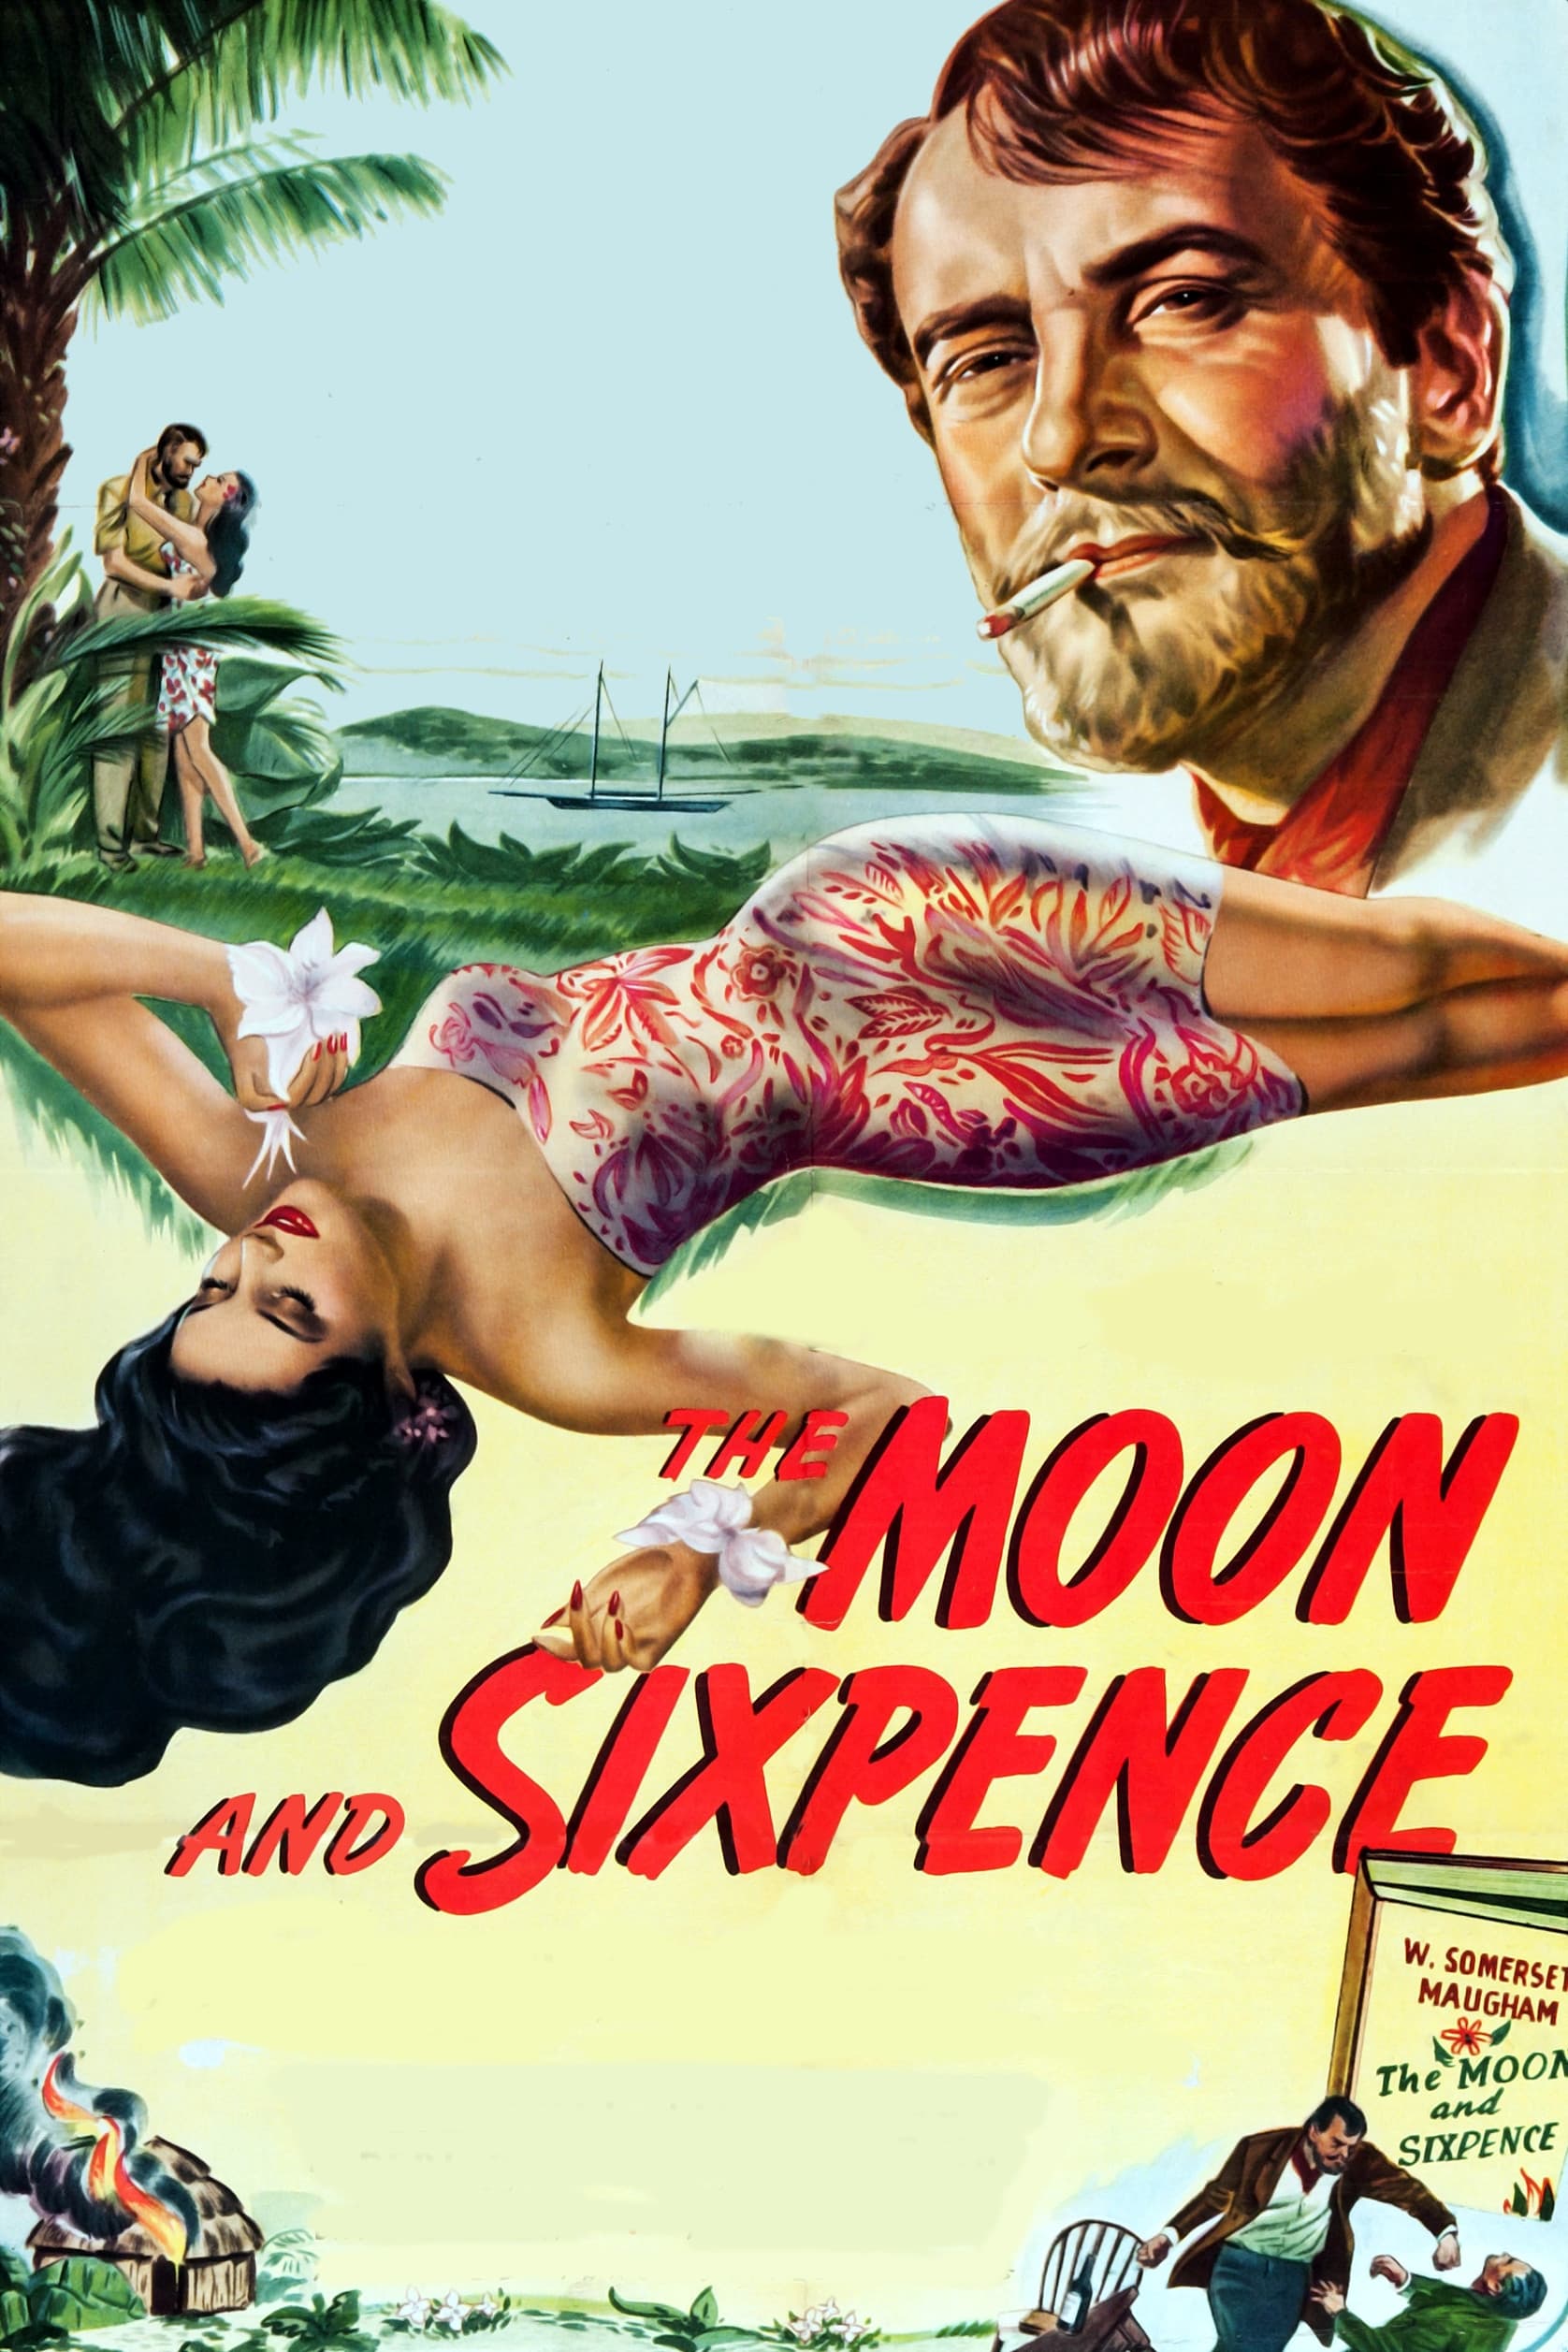 The Moon and Sixpence (1942)